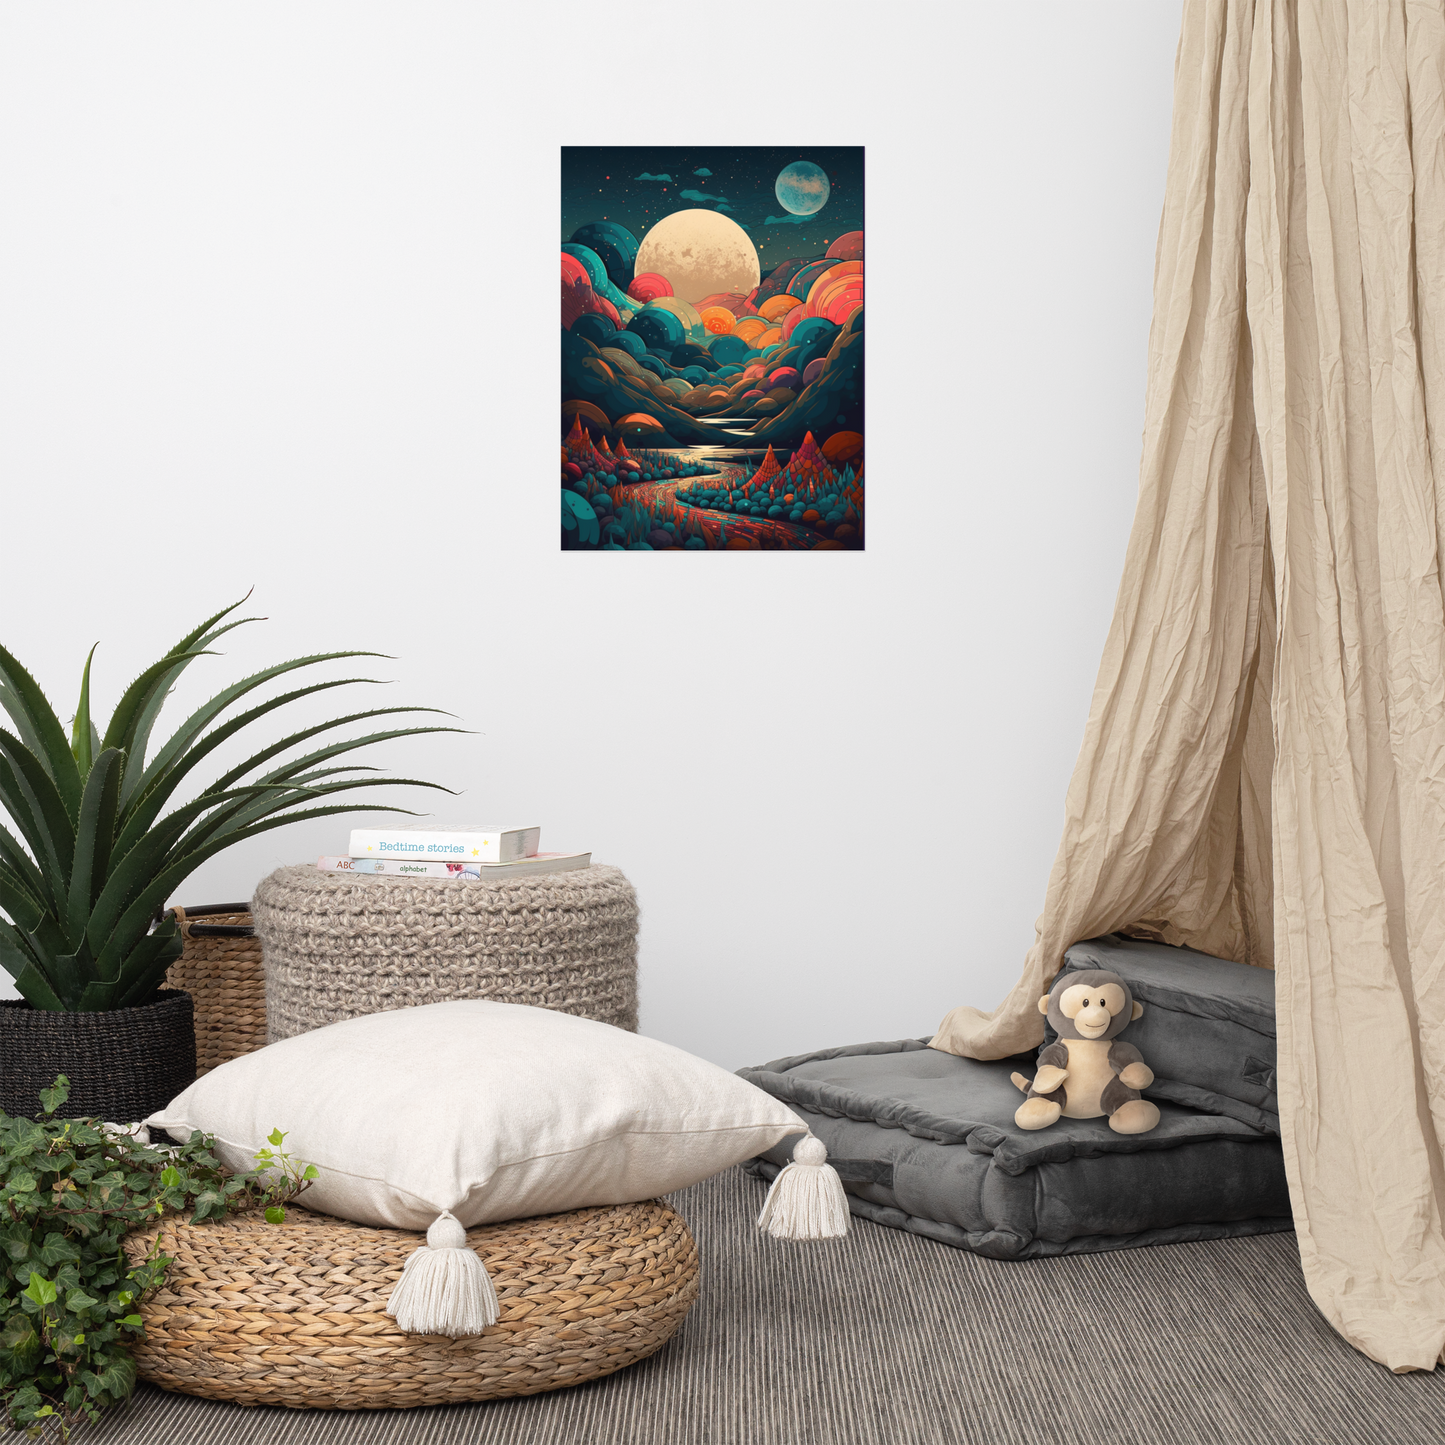 Explore Otherworldly Landscapes with Our Extraterrestrial Posters